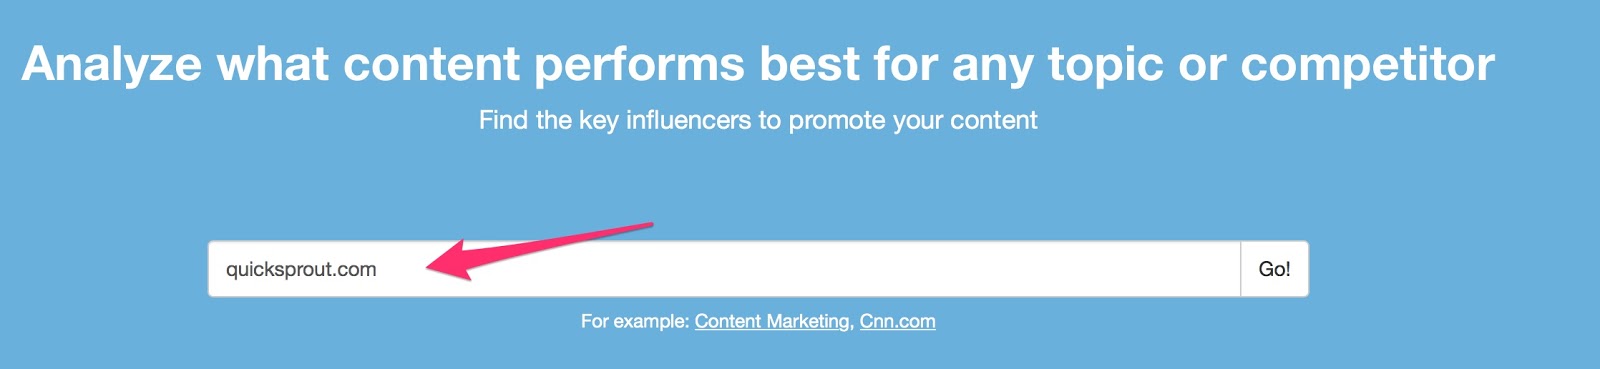 BuzzSumo Find the Most Shared Content and Key Influencers 2